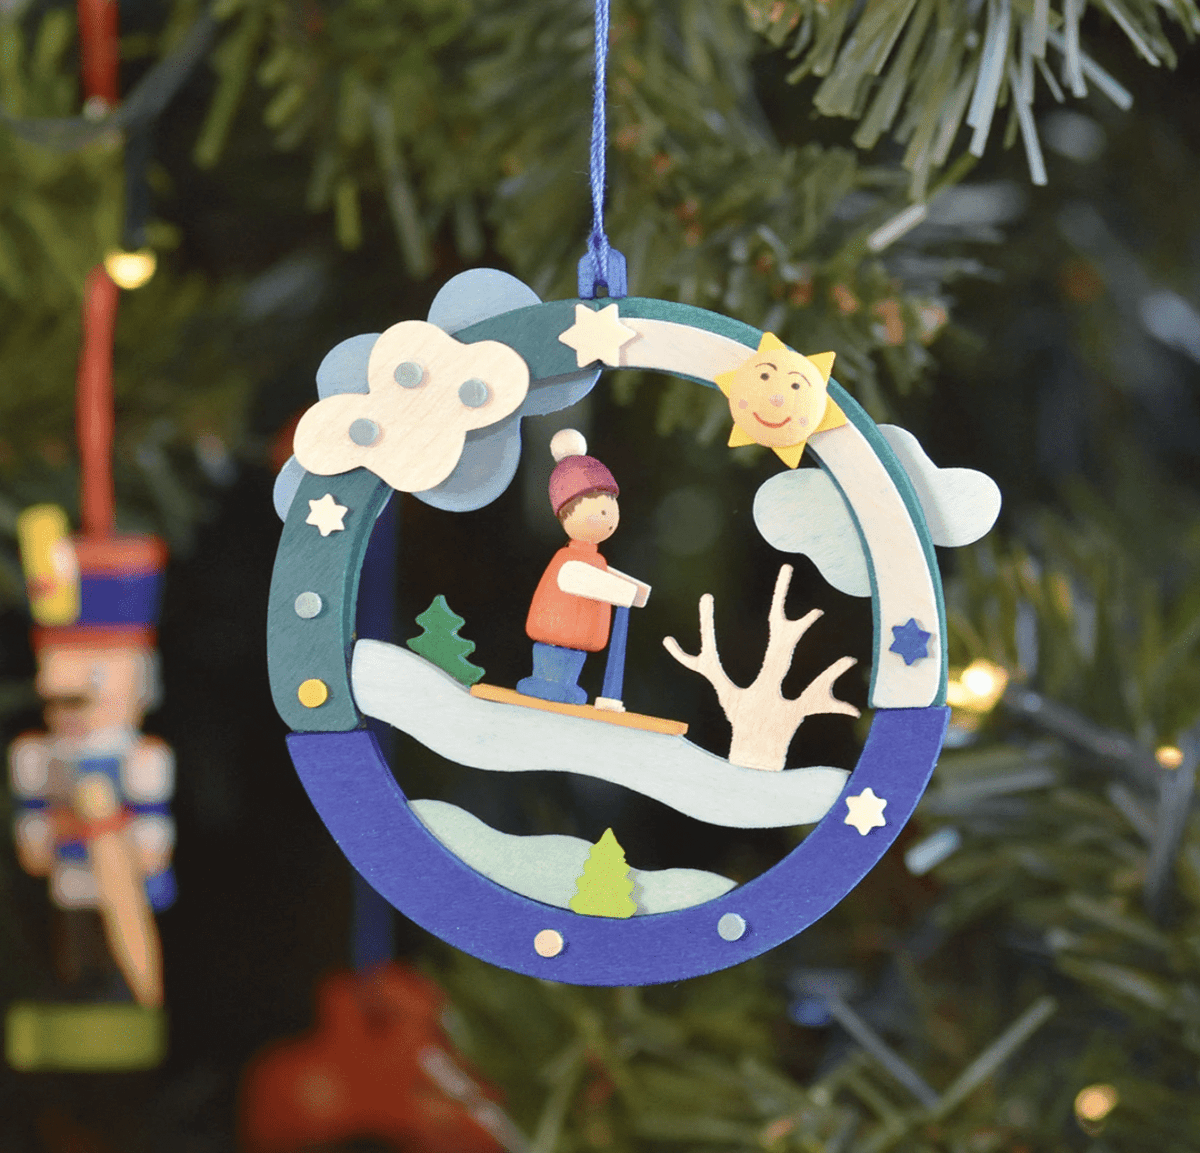 The Curated Parcel - Graupner // Christmas Tree Ornament Diorama 